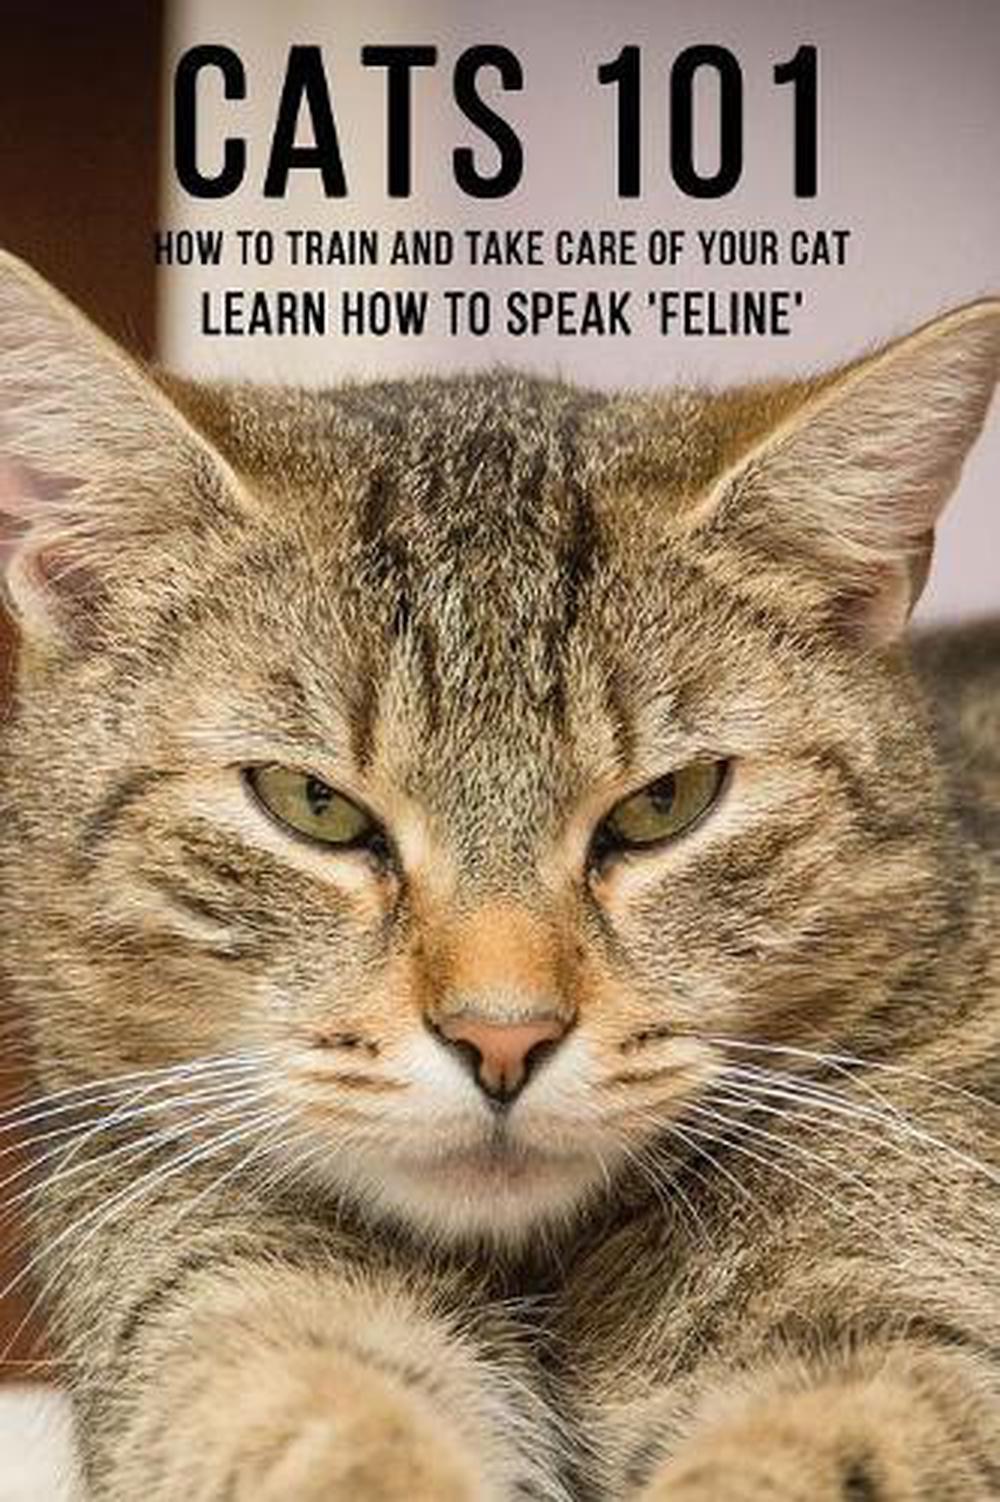 Cats 101 How to Train and Take Care of Your Cat Learn How to Speak